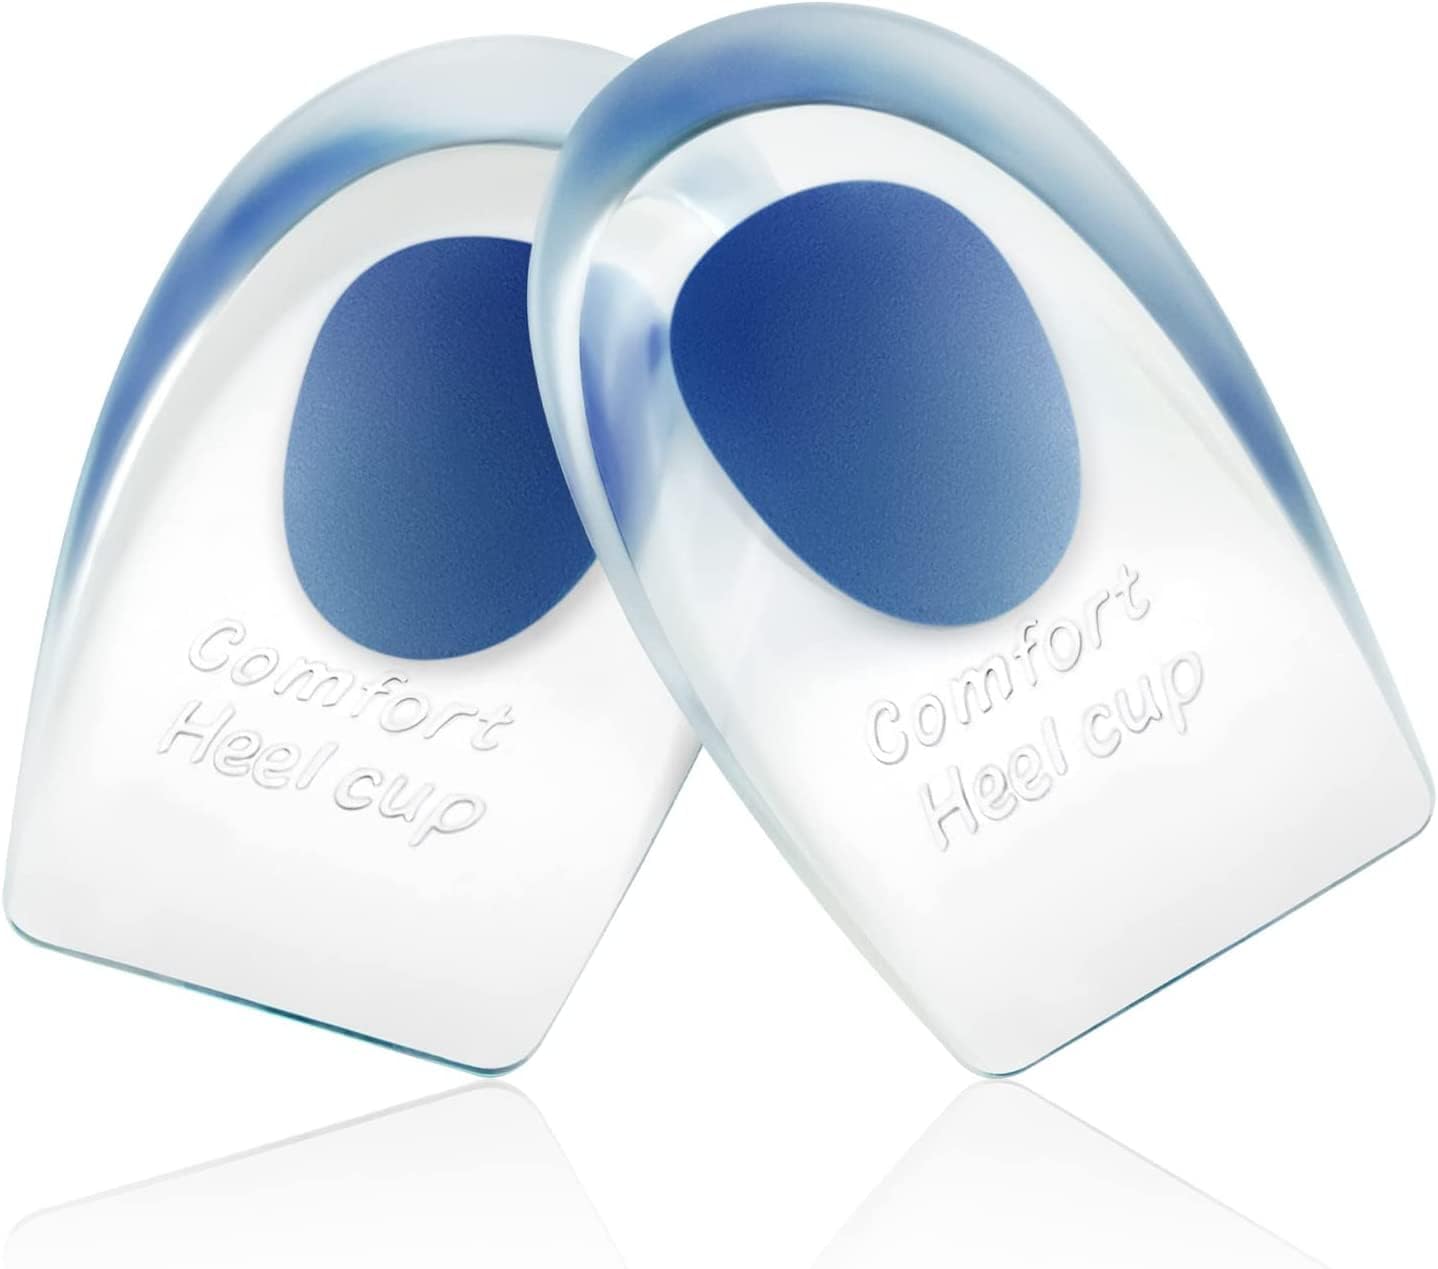 Gel Silicone Heel Cups/Pads - 1 Pair Heel Lifts for [...]